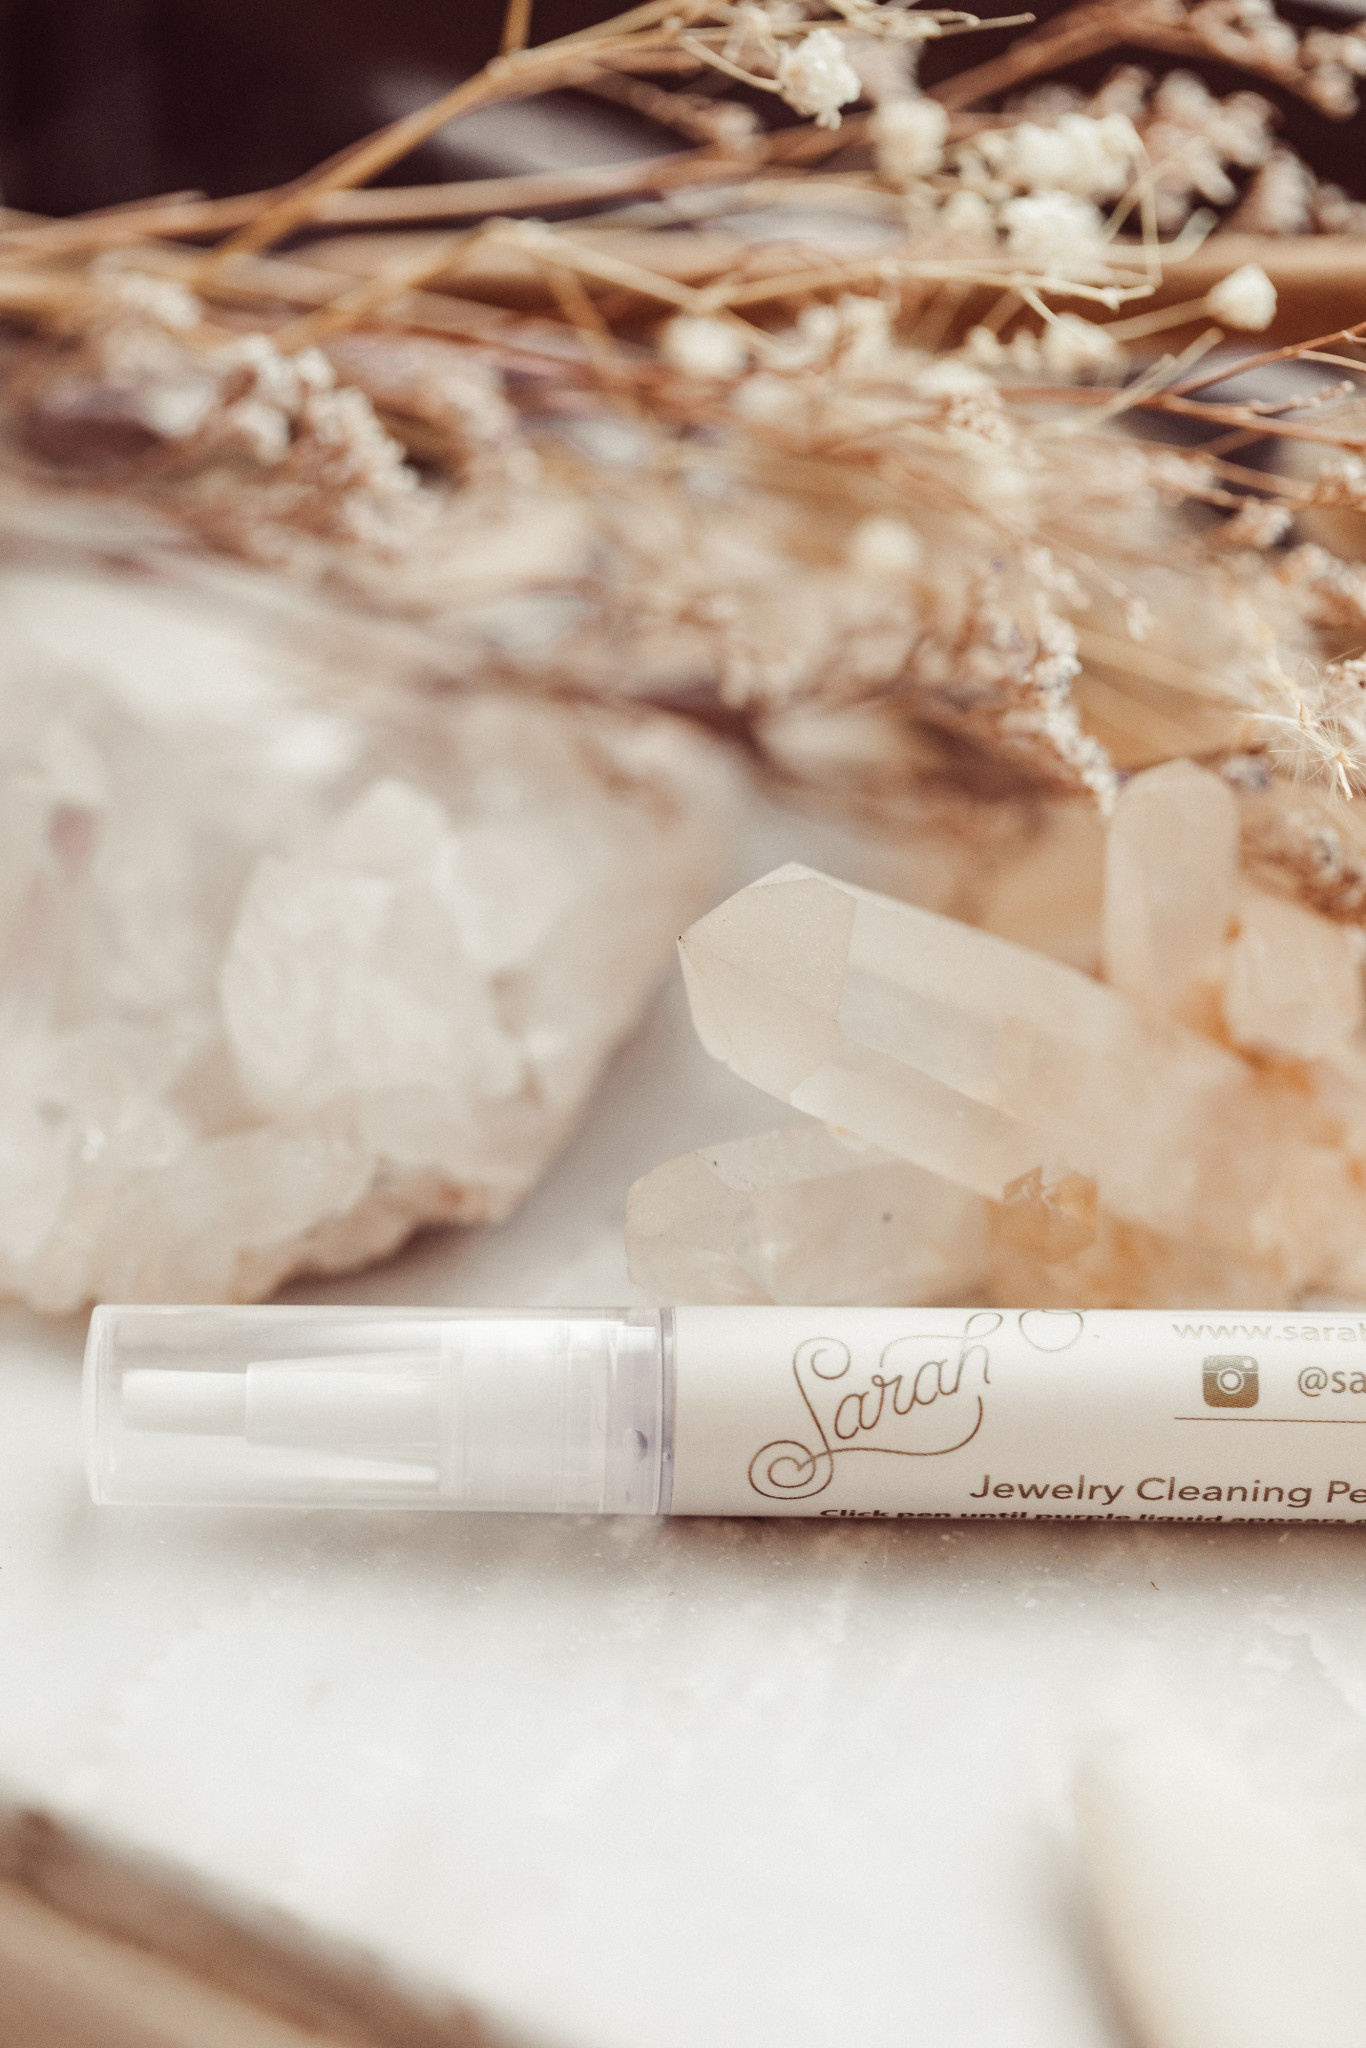 Jewelry Cleaning Pen - Sarah O.